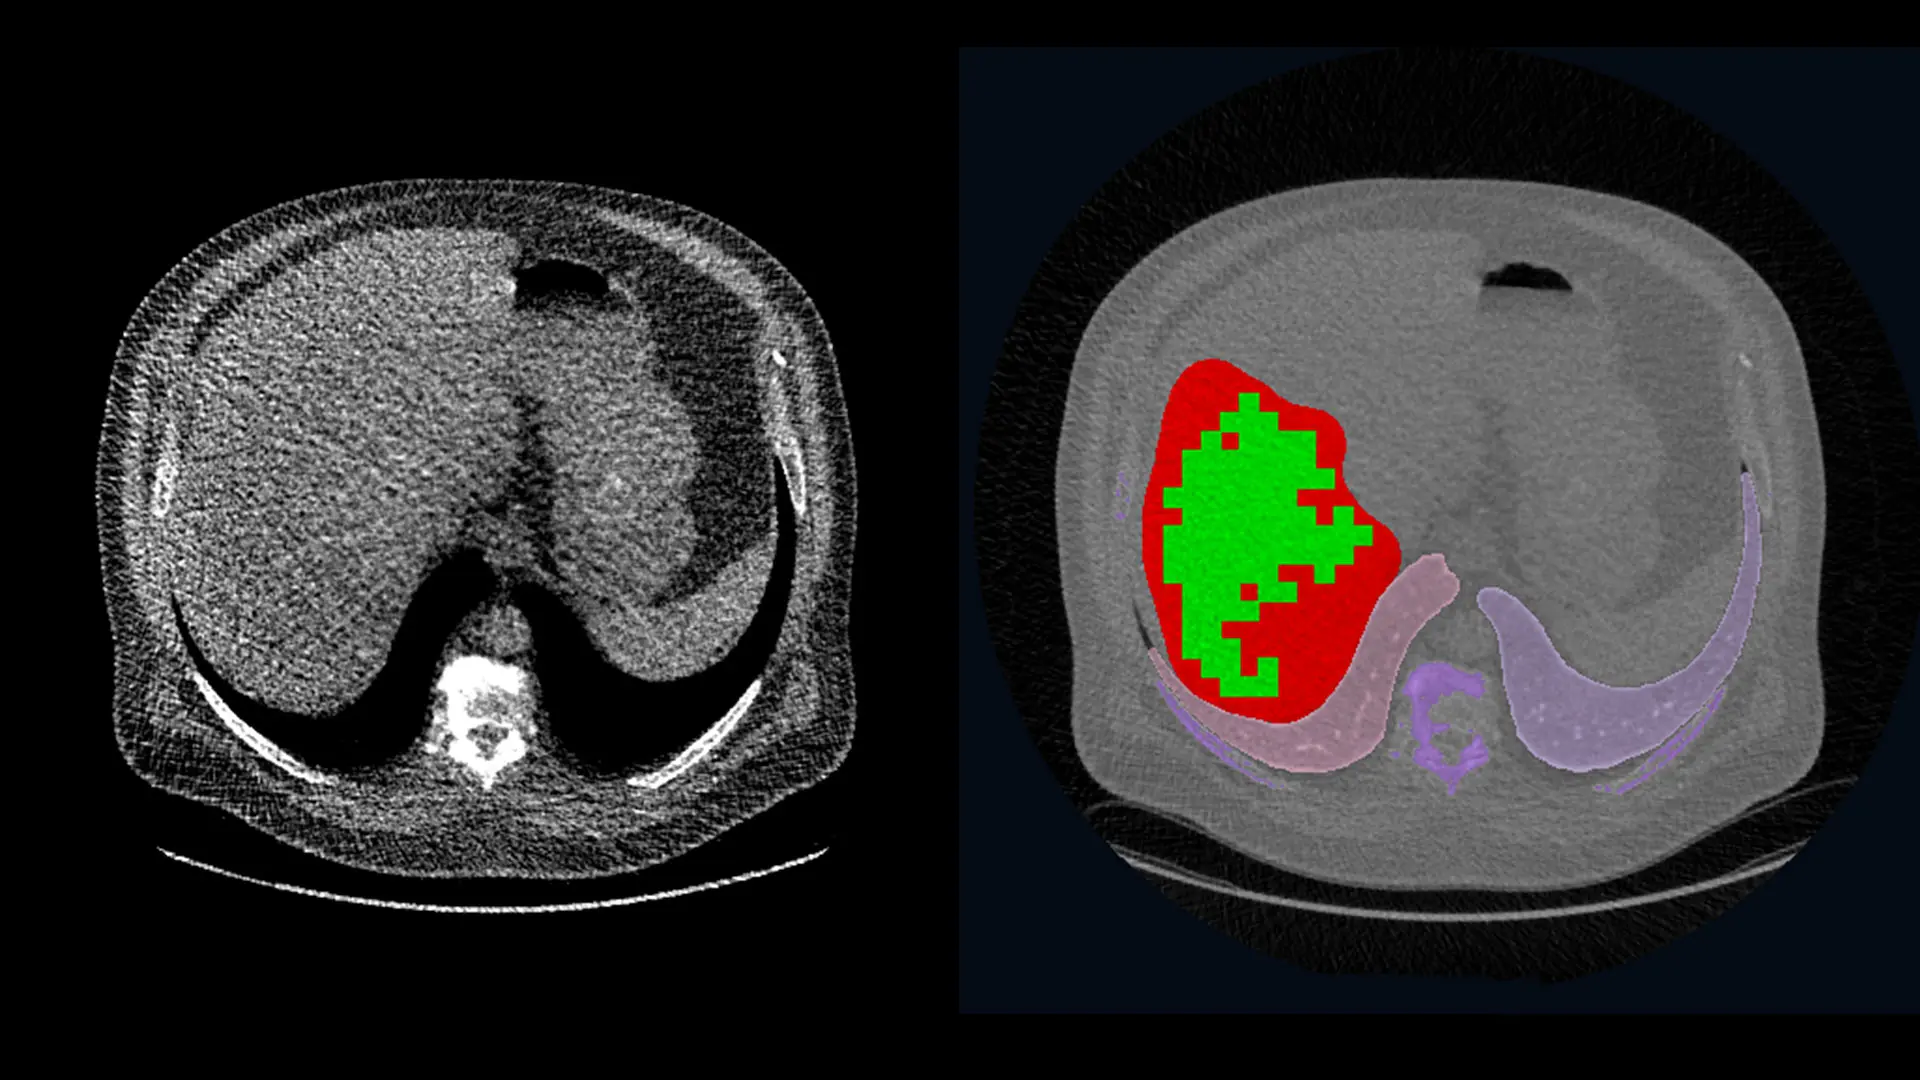 Left: A single slice of the CT scan for a participant in the WTC study with a liver density indicative of moderate-to-severe steatosis. Right: The same CT scan shows the region of the liver to be analyzed in red, the sampled areas in green, and other organs in purple (the lungs and vertebrae).  





 





